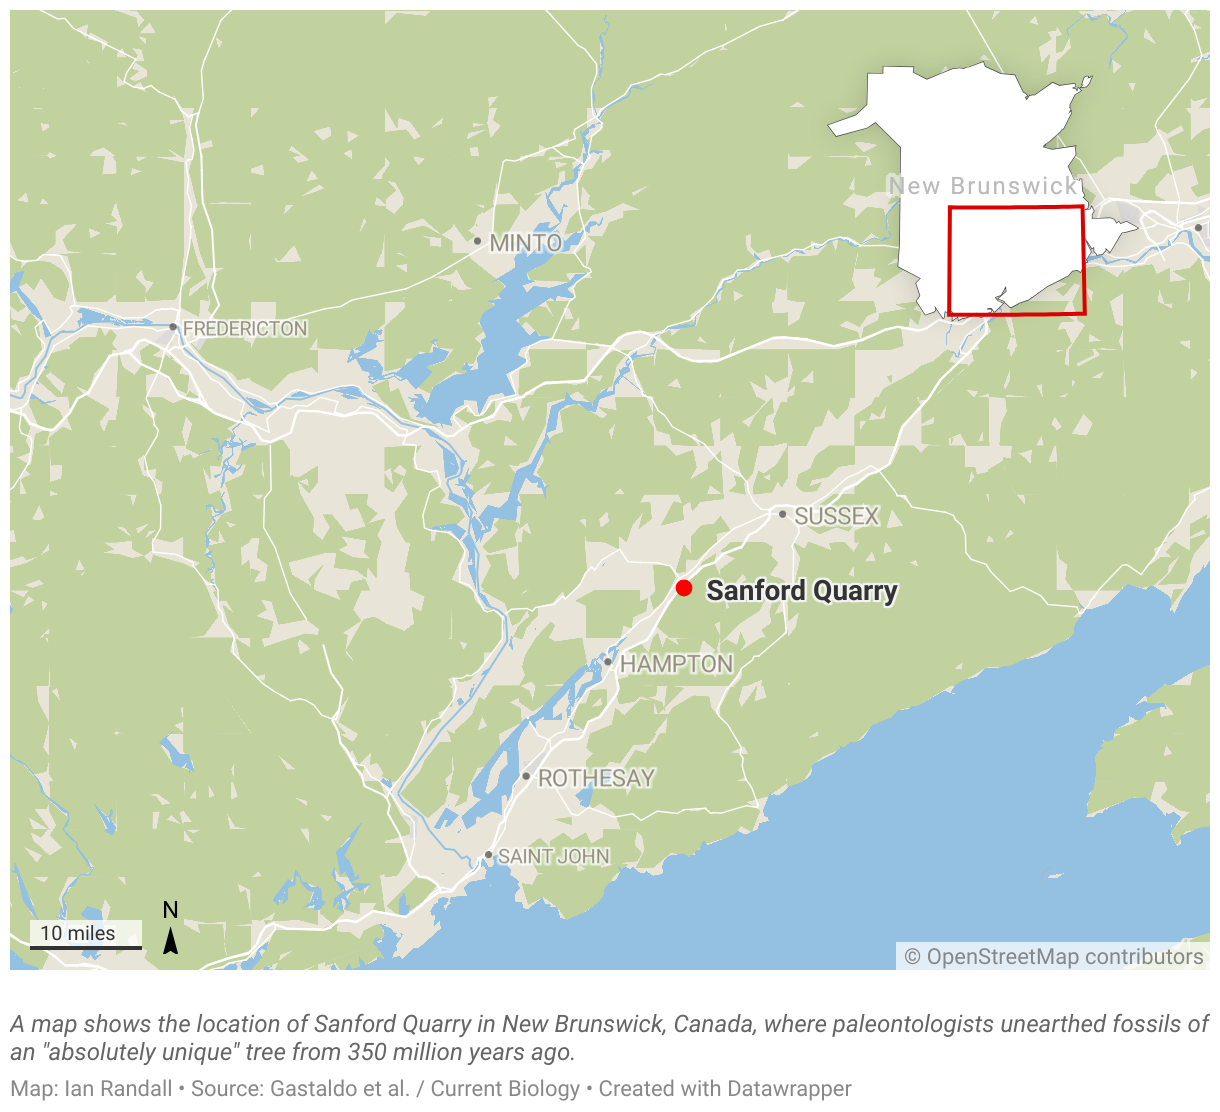 A map shows the location of Sanford Quarry, in New Brunswick, Canada.